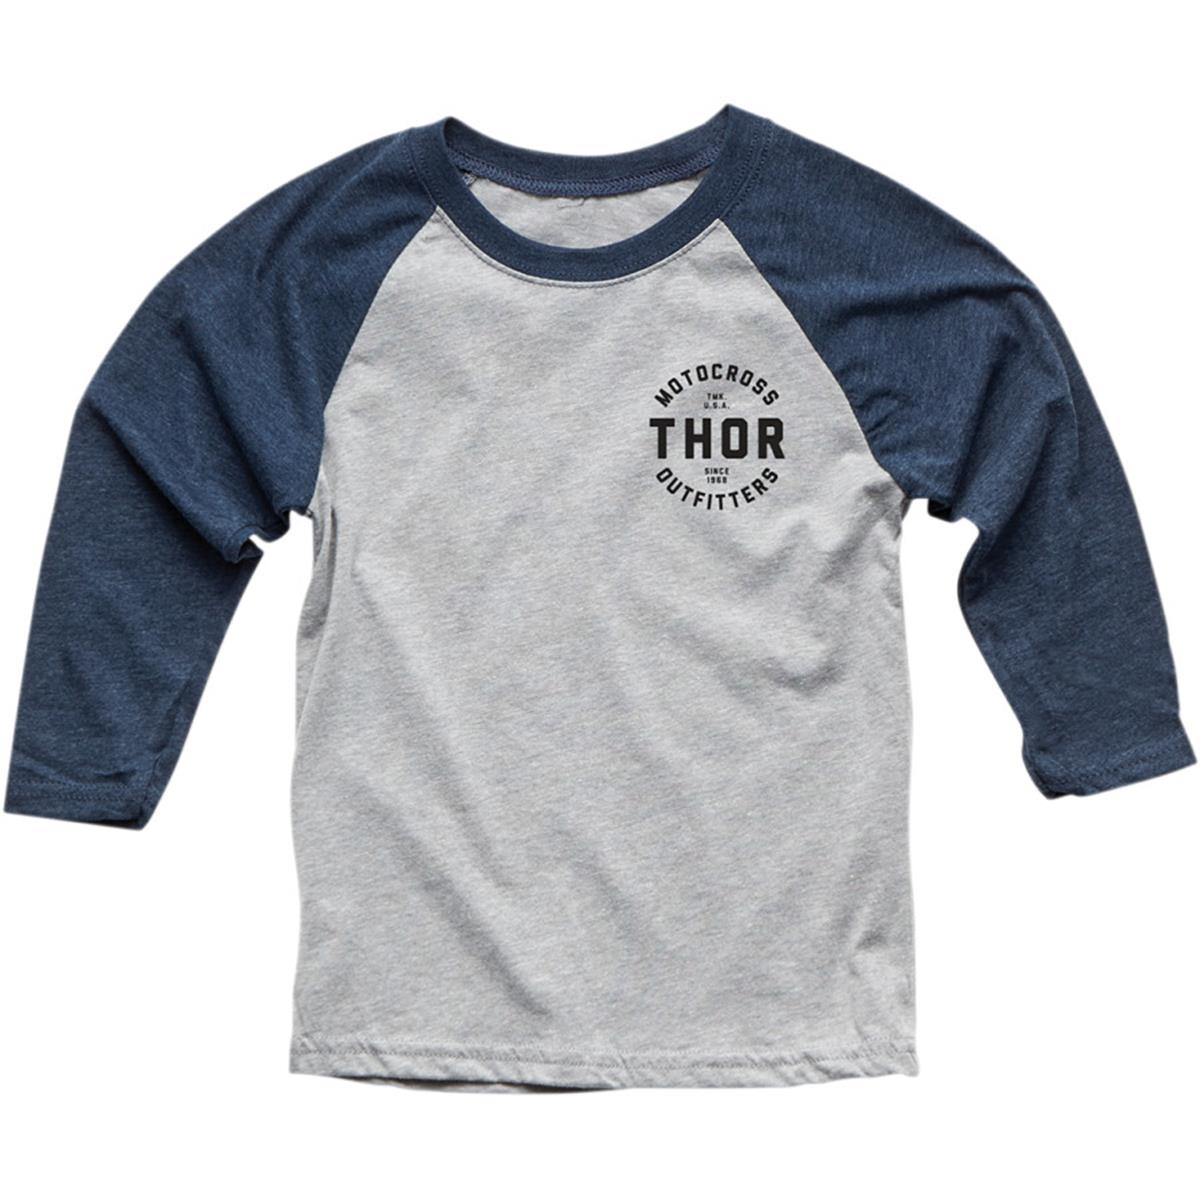 Thor Kids 3/4-Arm Shirt Outfitters Navy